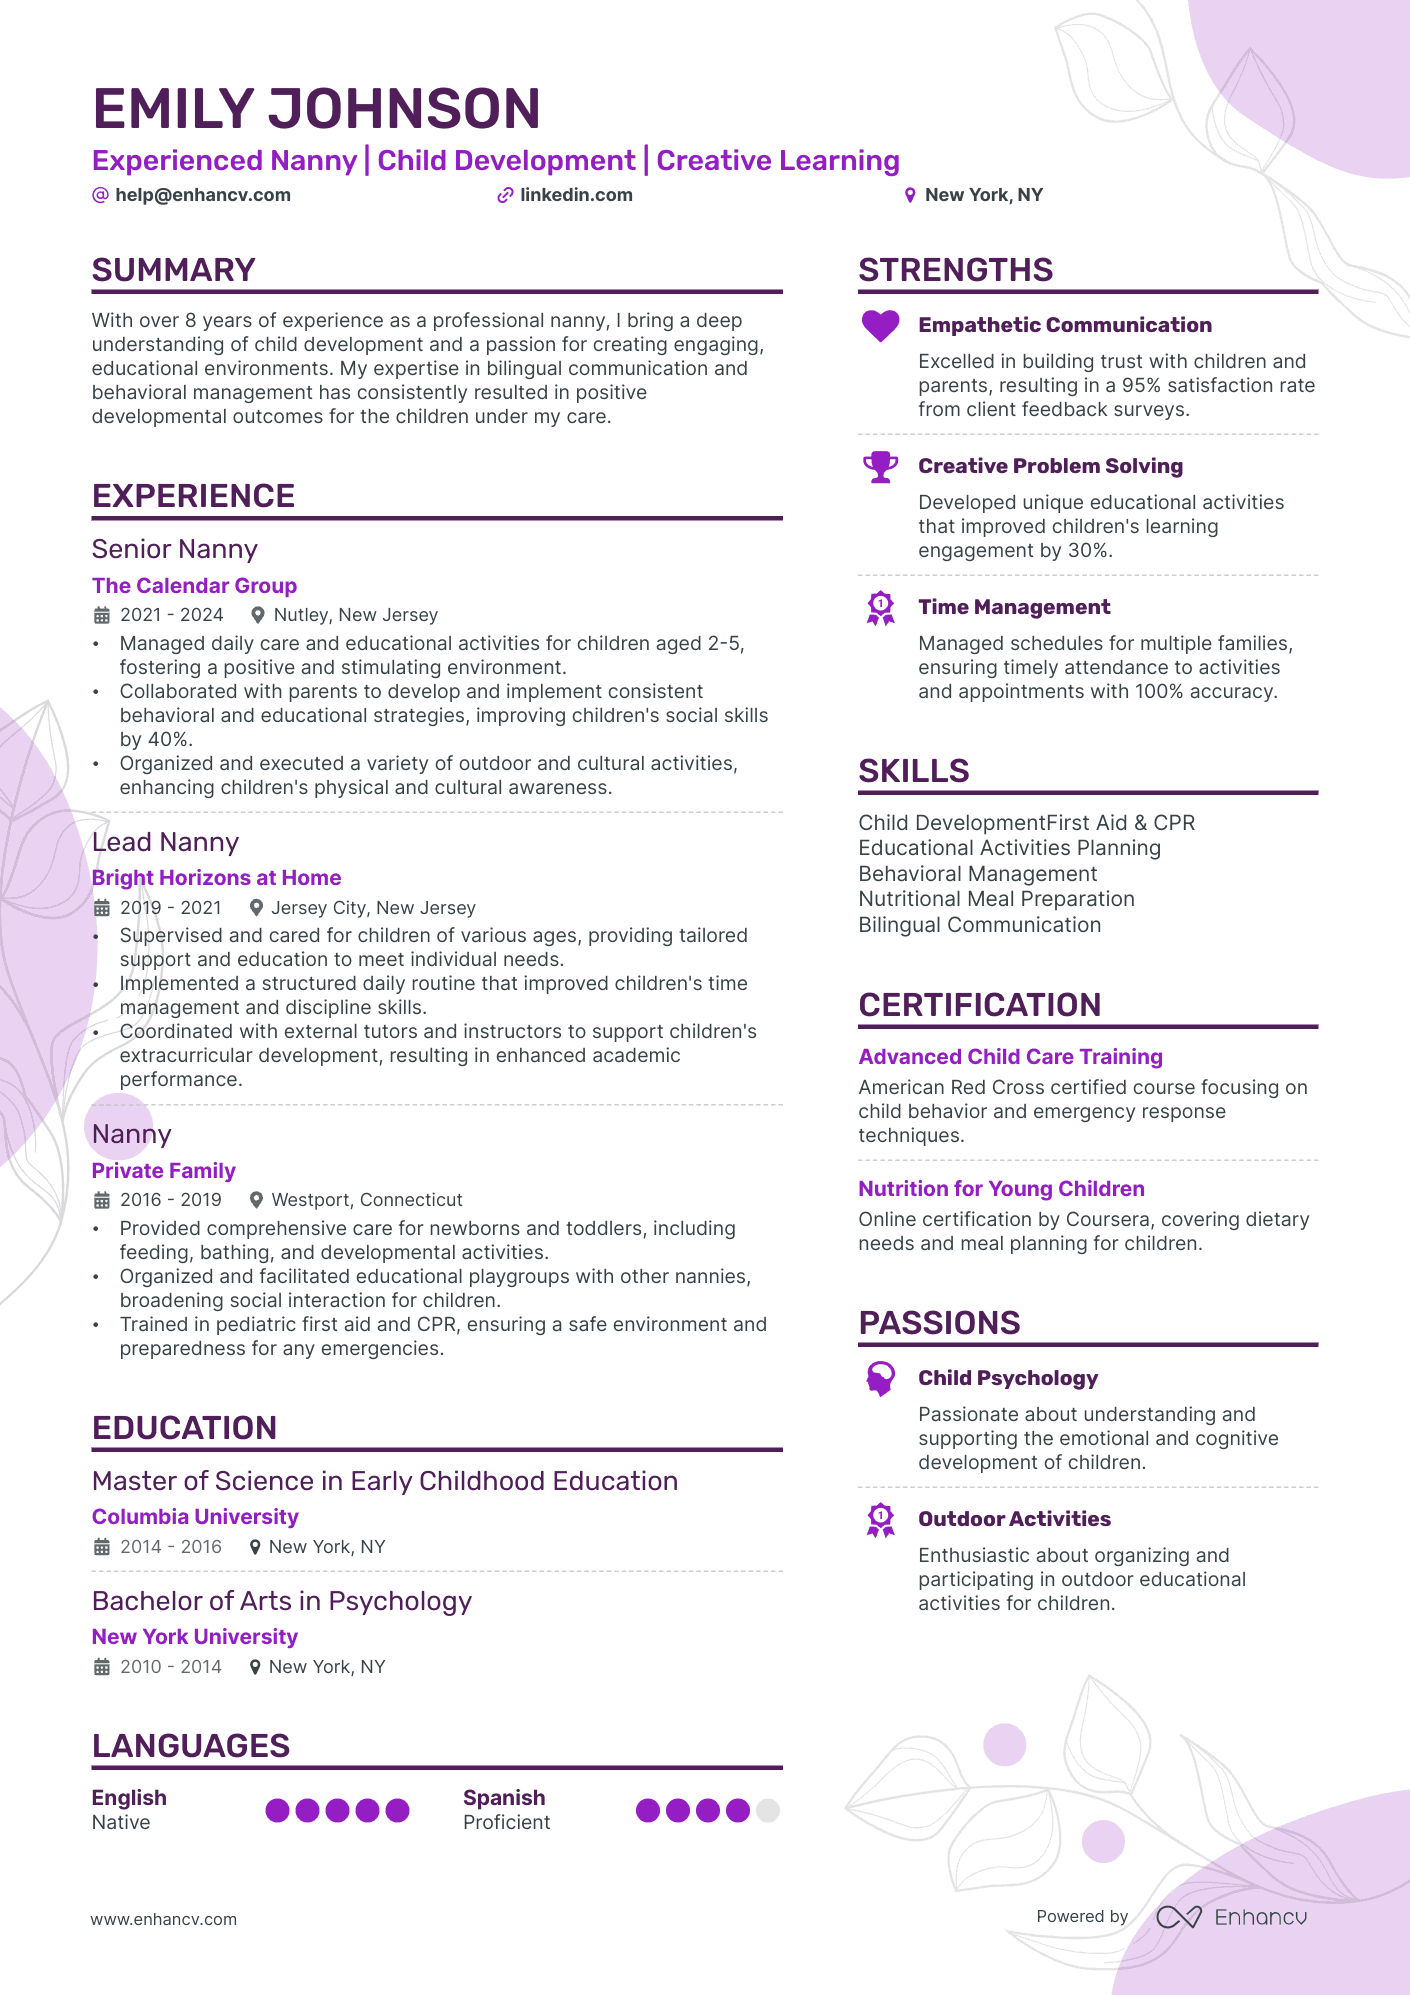 Experienced Nanny | Child Development | Creative Learning resume example